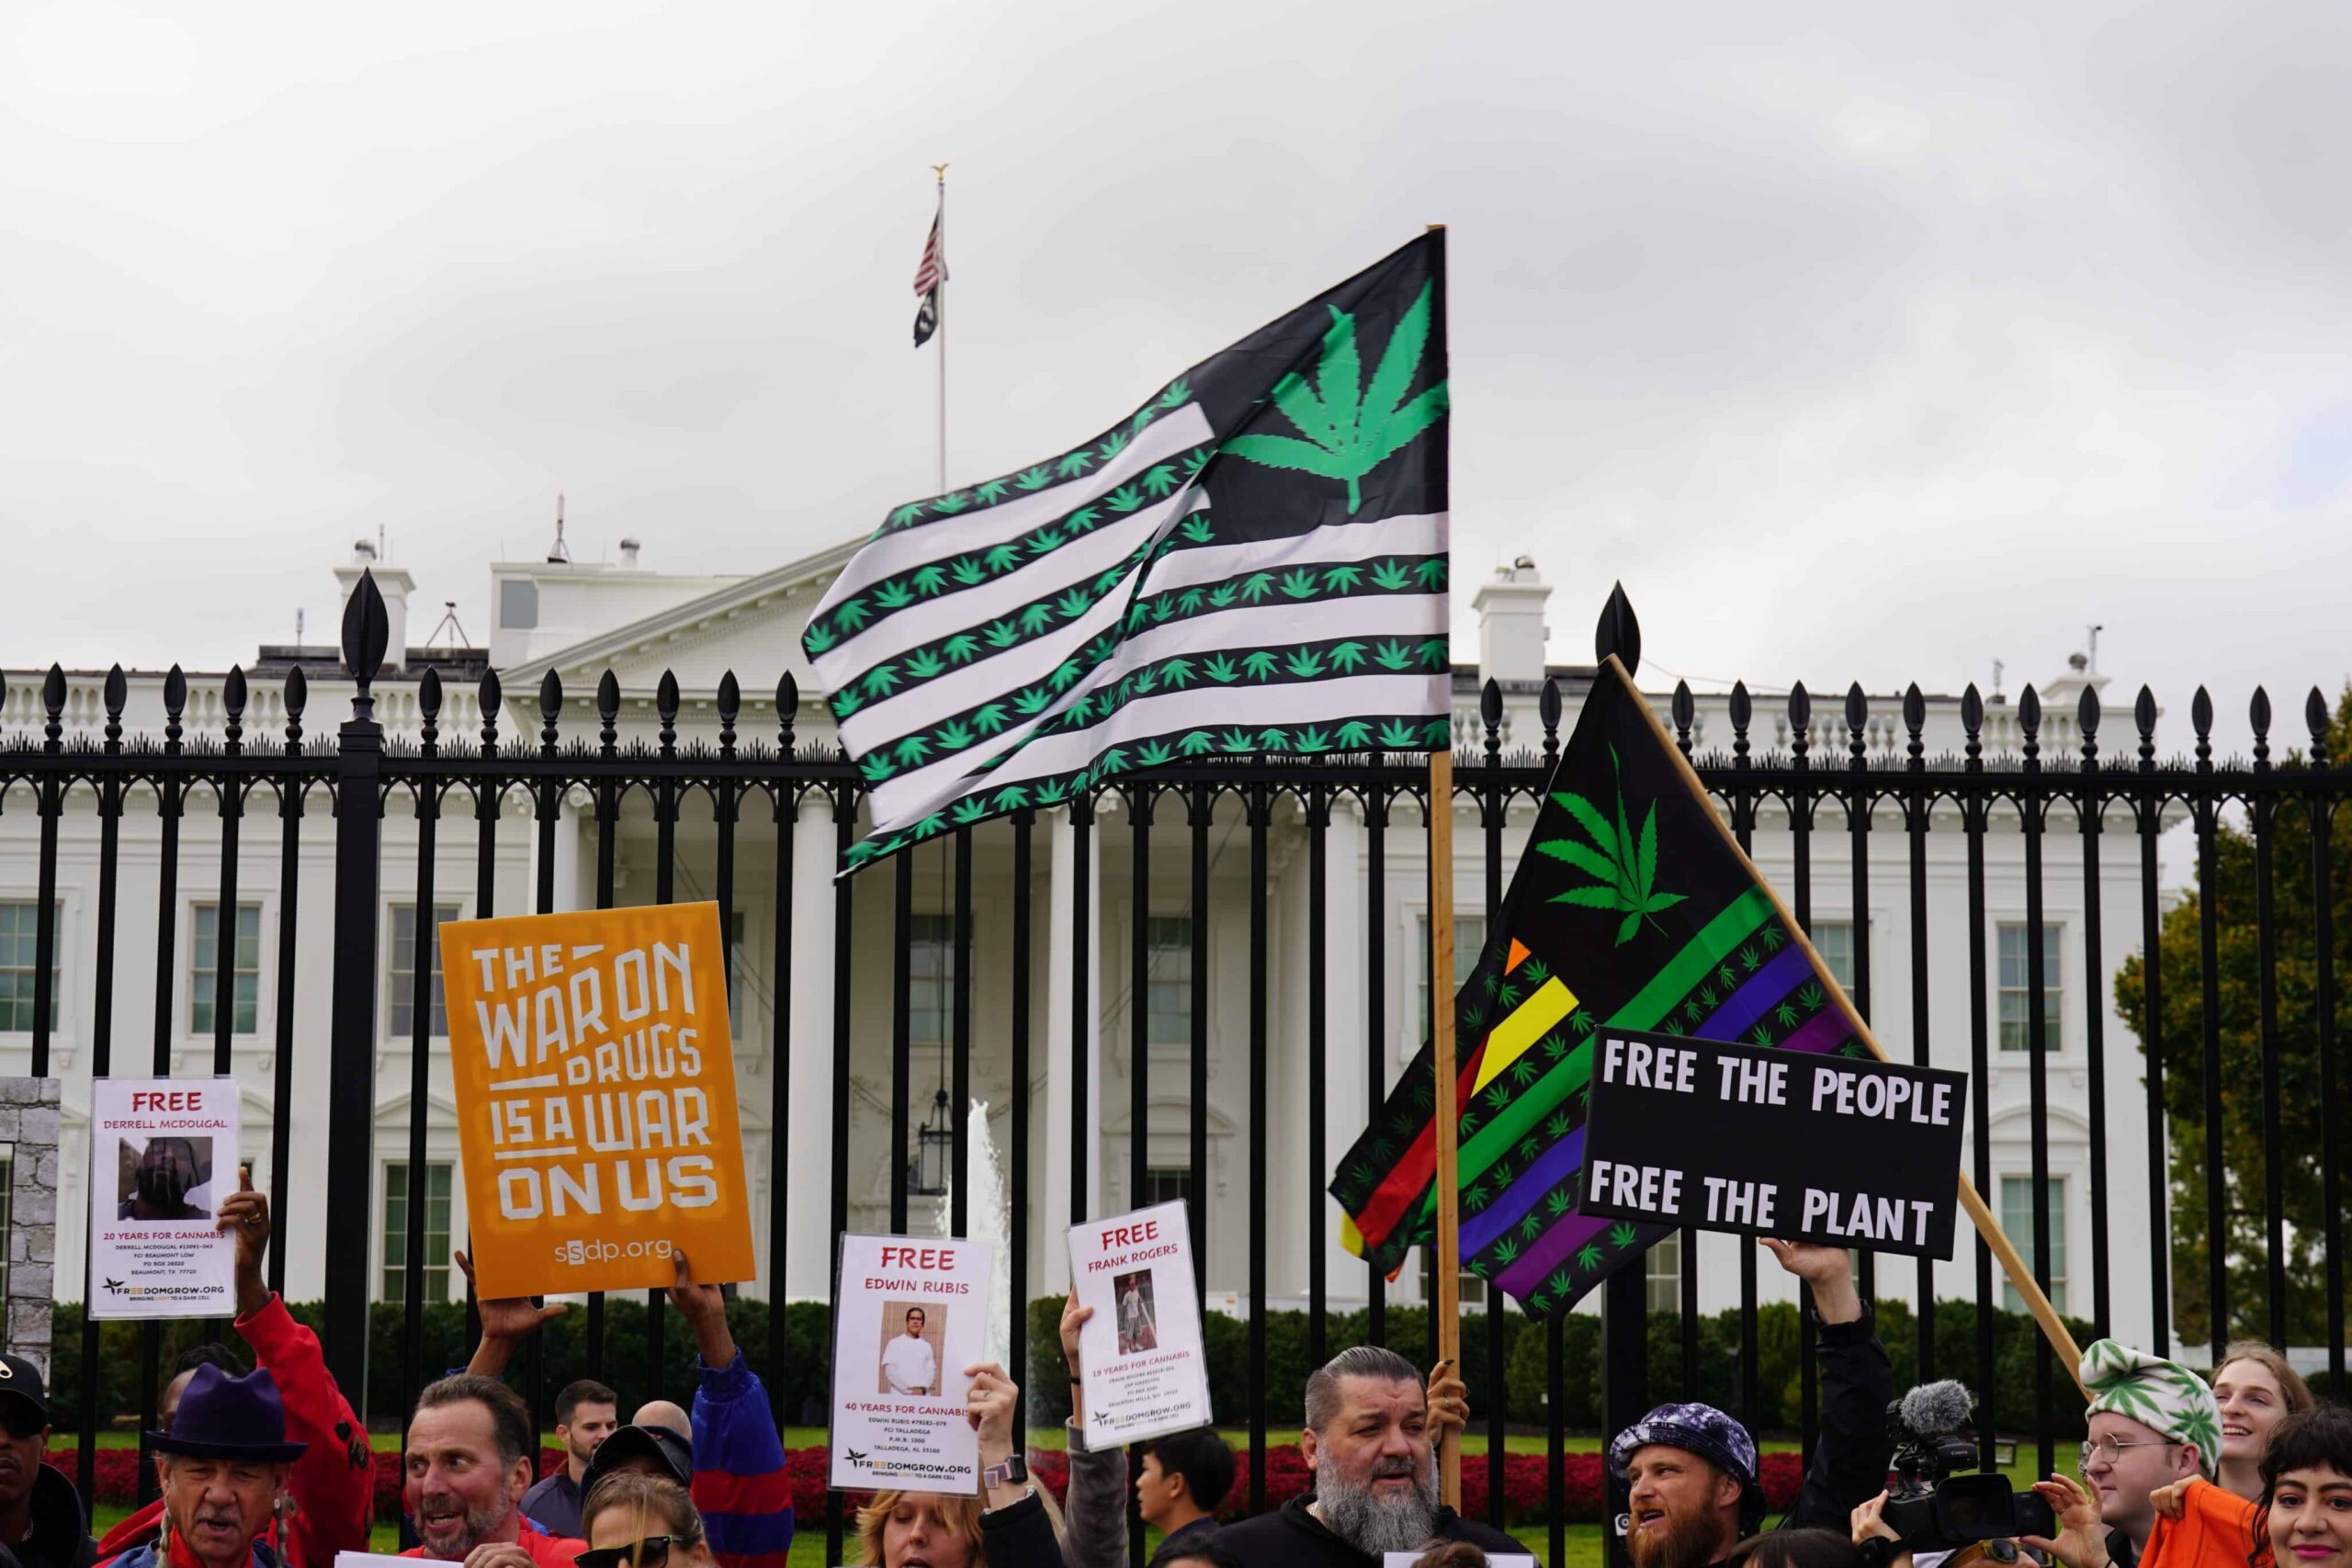 Pew Survey Finds 9 in 10 Americans Support Pot Legalization